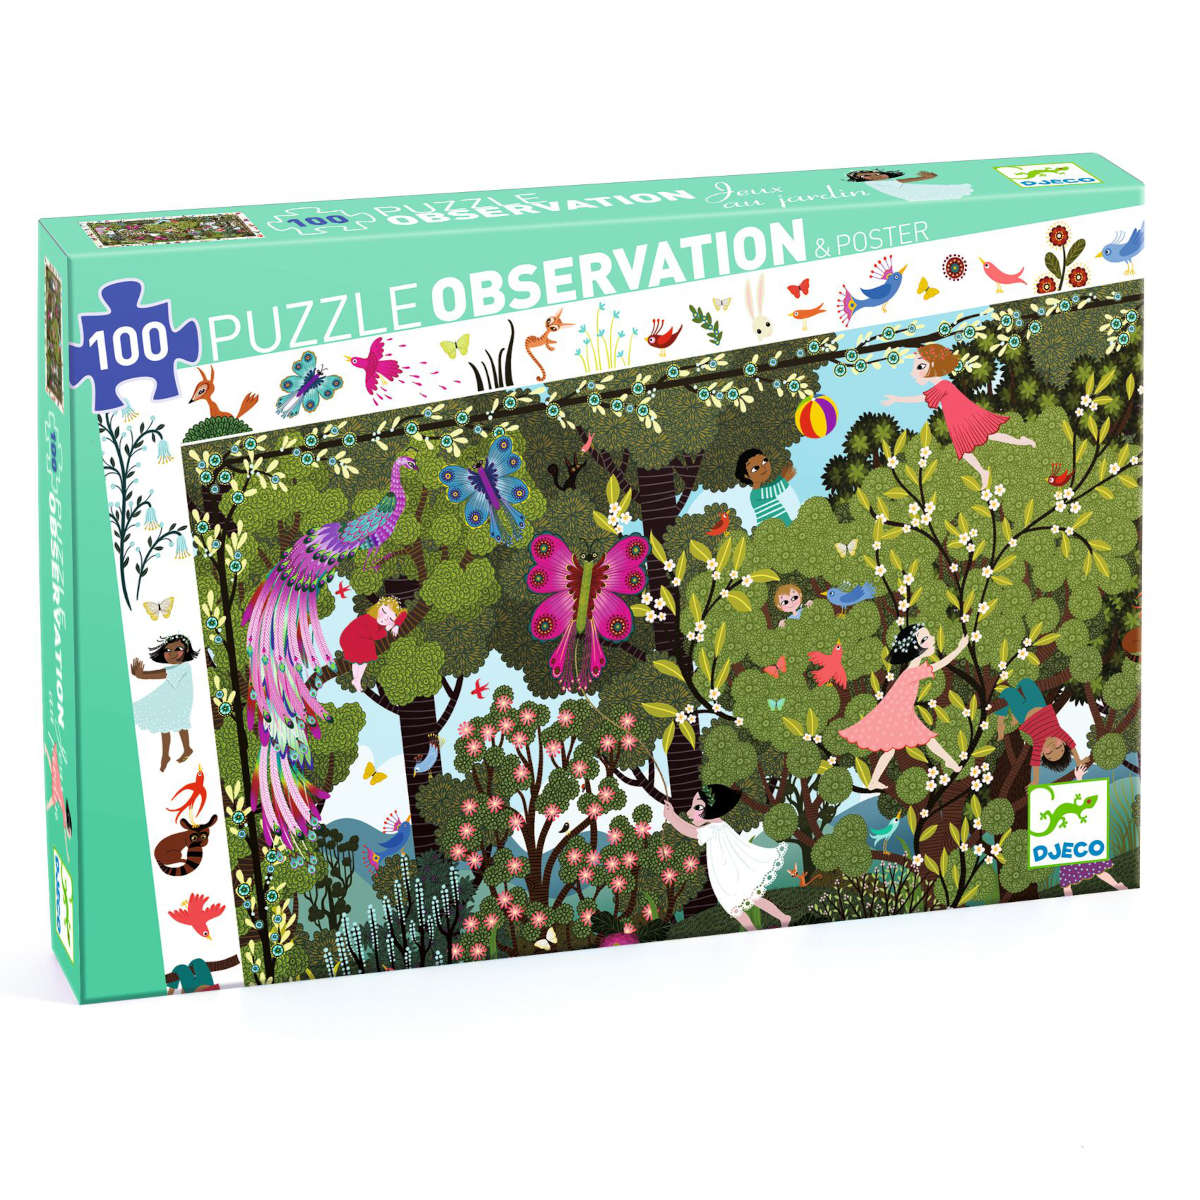 Djeco Garden Play Time Observation Puzzle 100 pieces